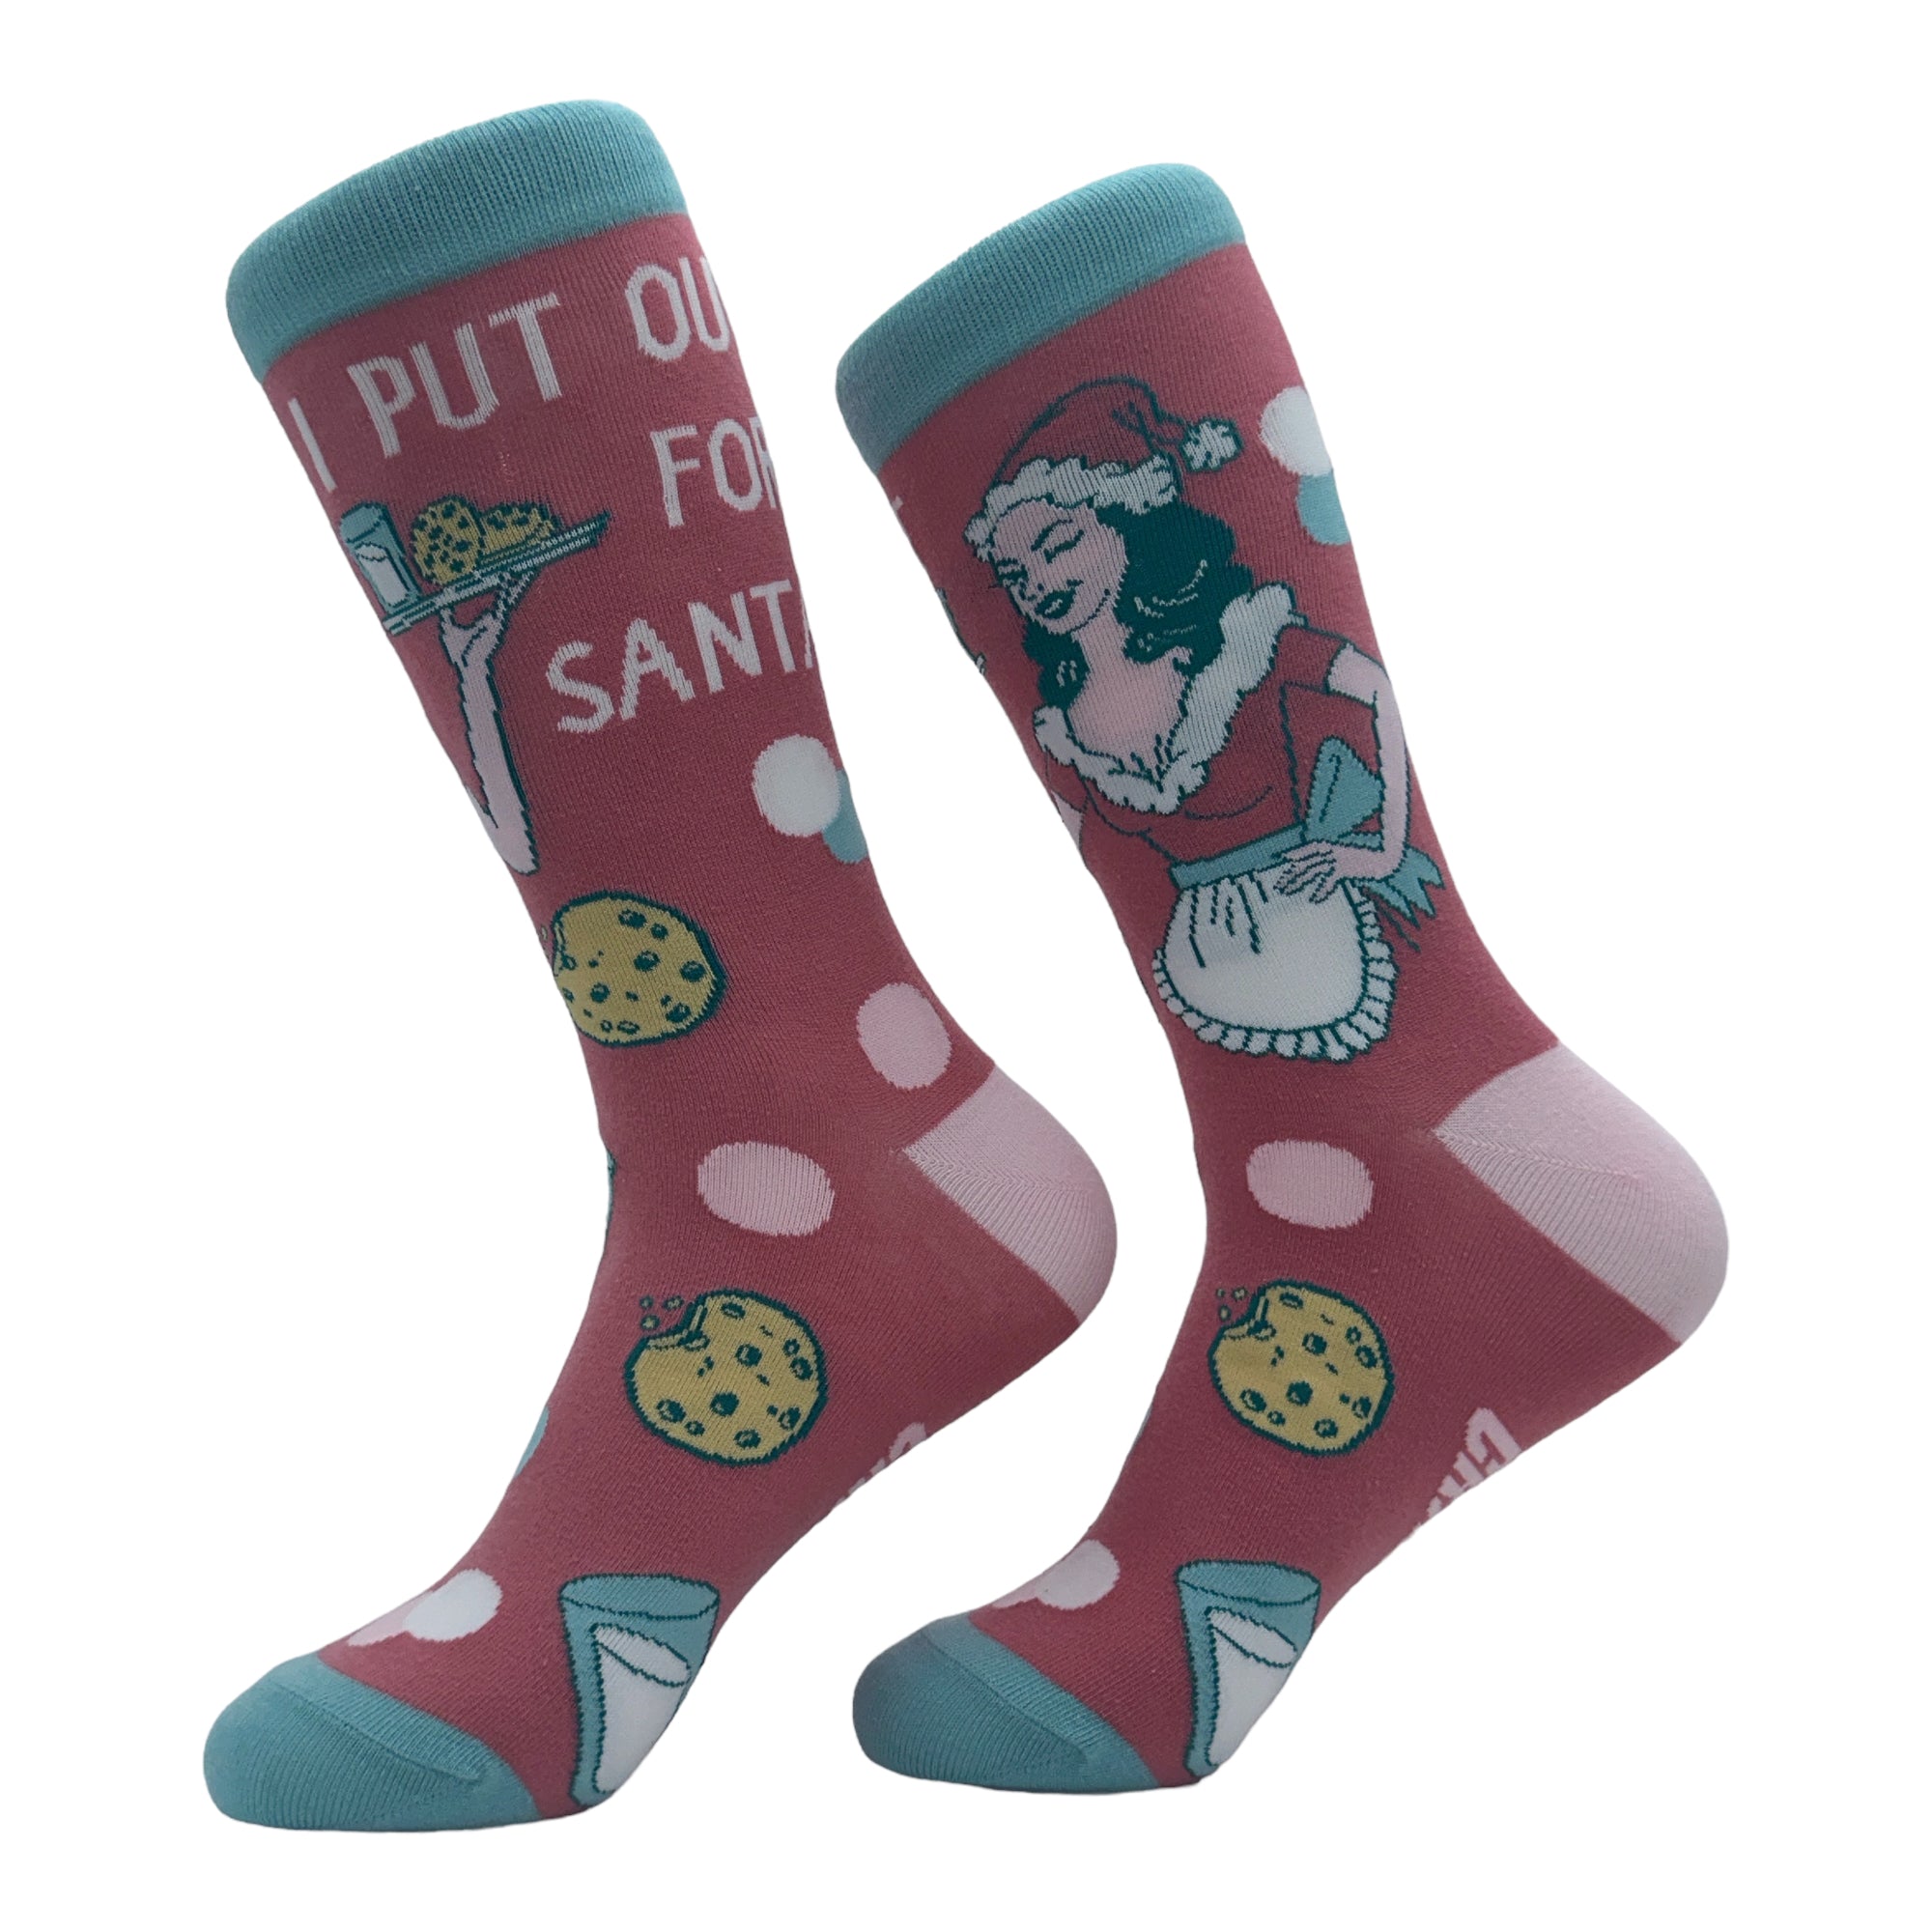 Funny Multi - Put Out Women's I Put Out For Santa Sock Nerdy Christmas sex Sarcastic Tee